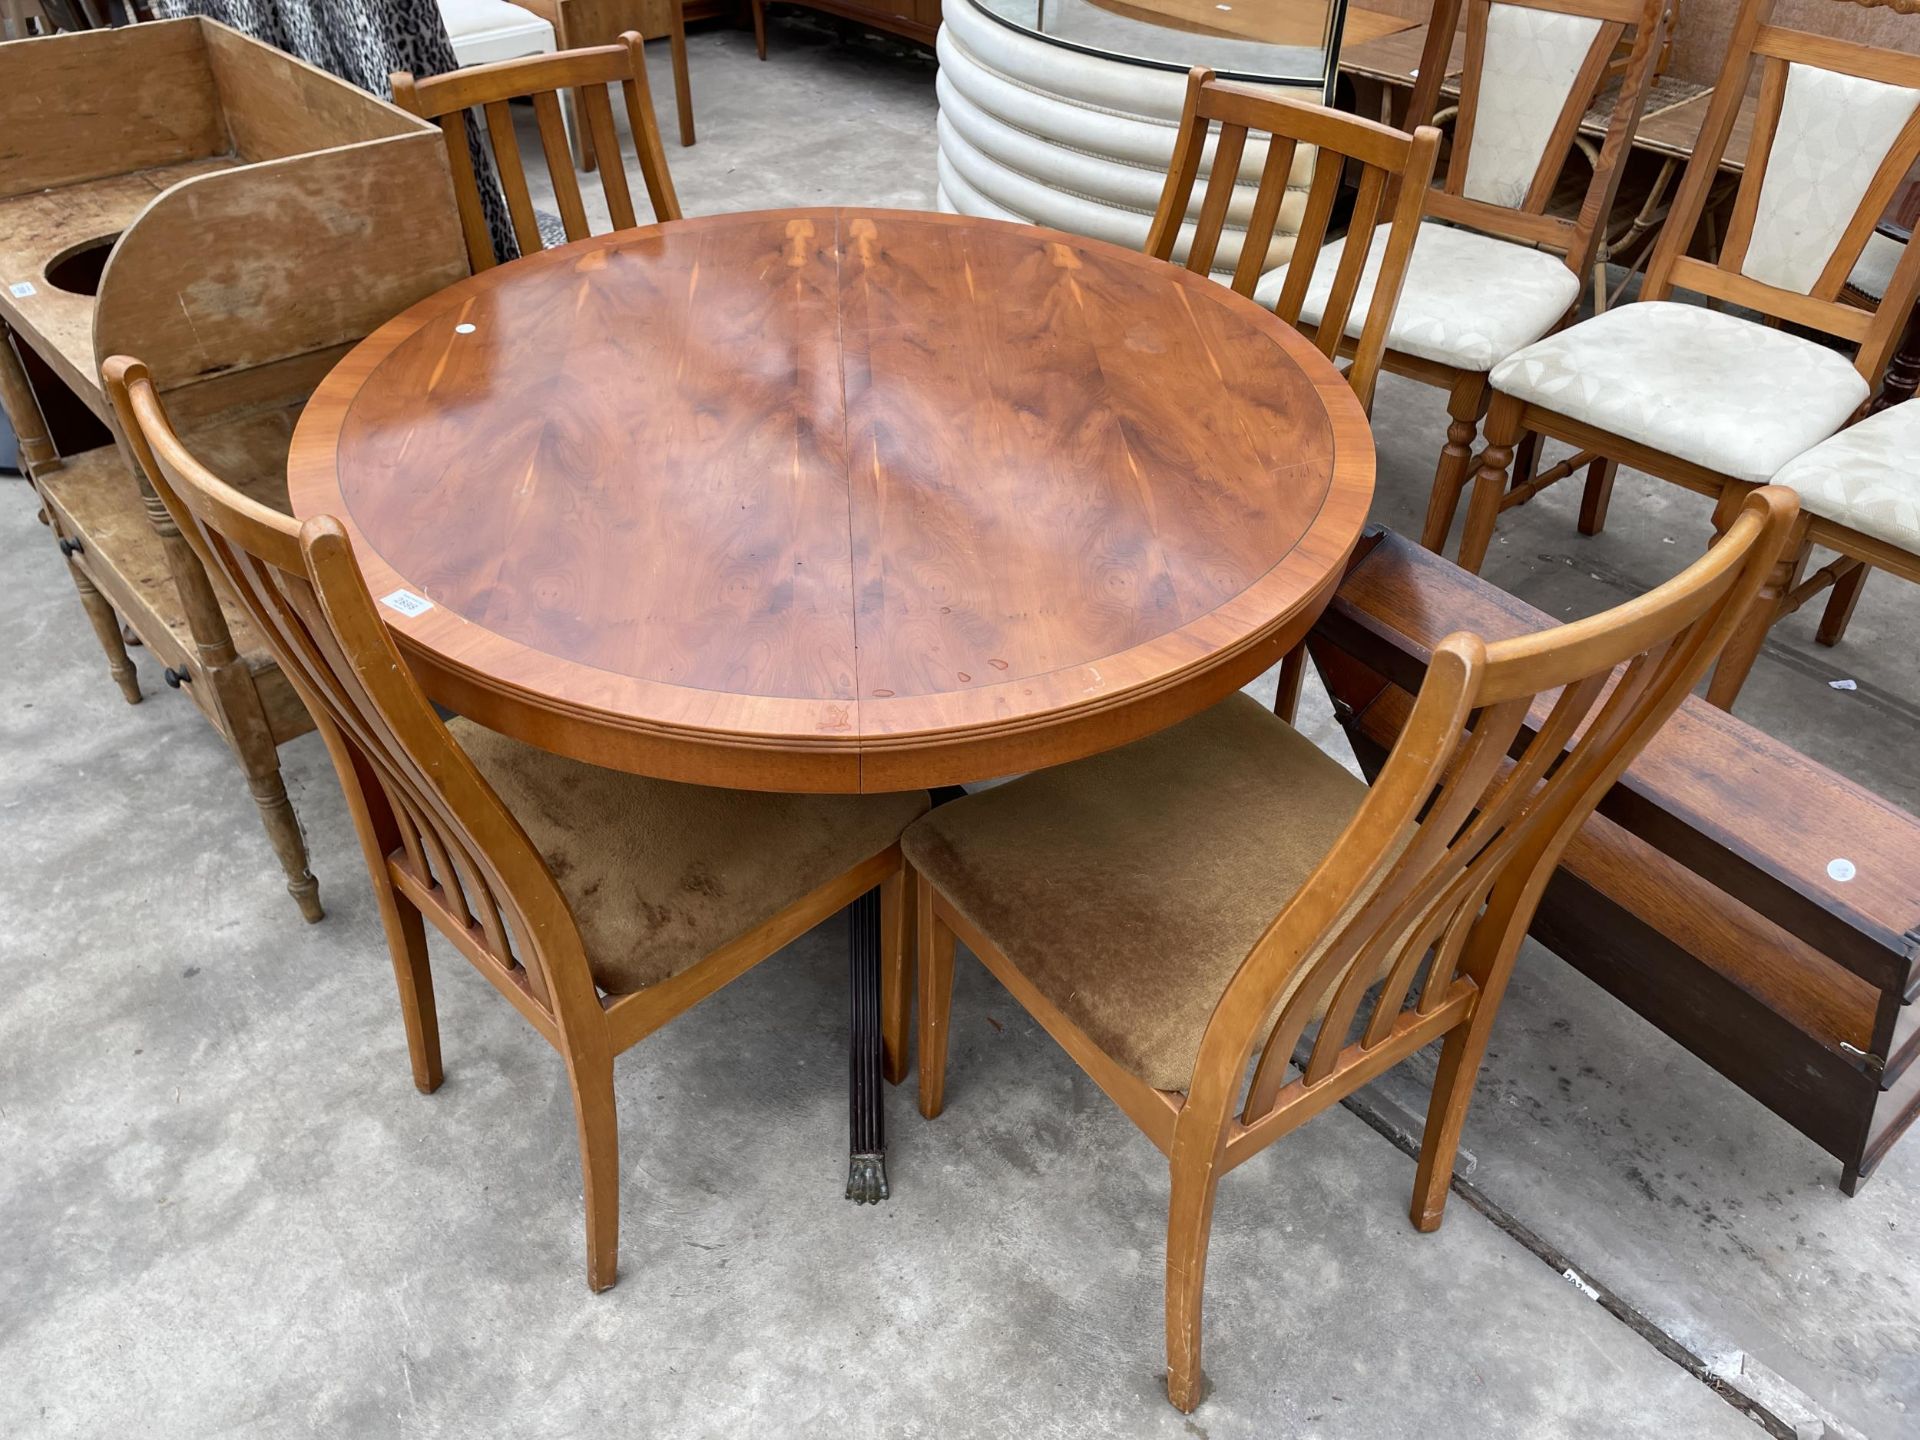 A YEW WOOD PEDESTAL DINING TABLE AND FOUR CHAIRS